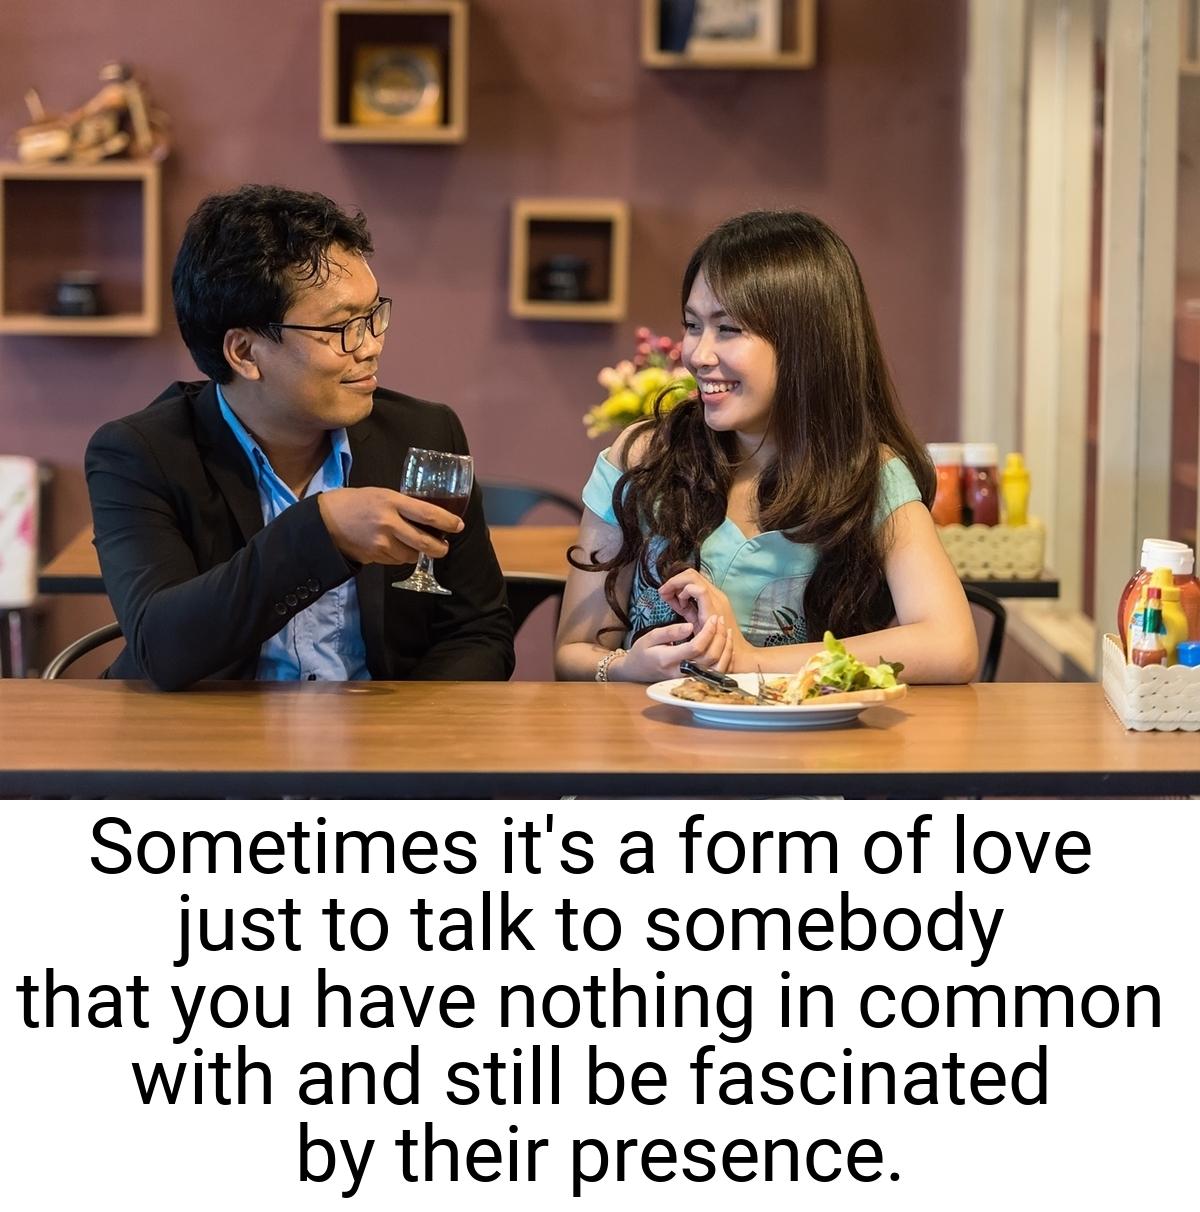 Sometimes it's a form of love just to talk to somebody that